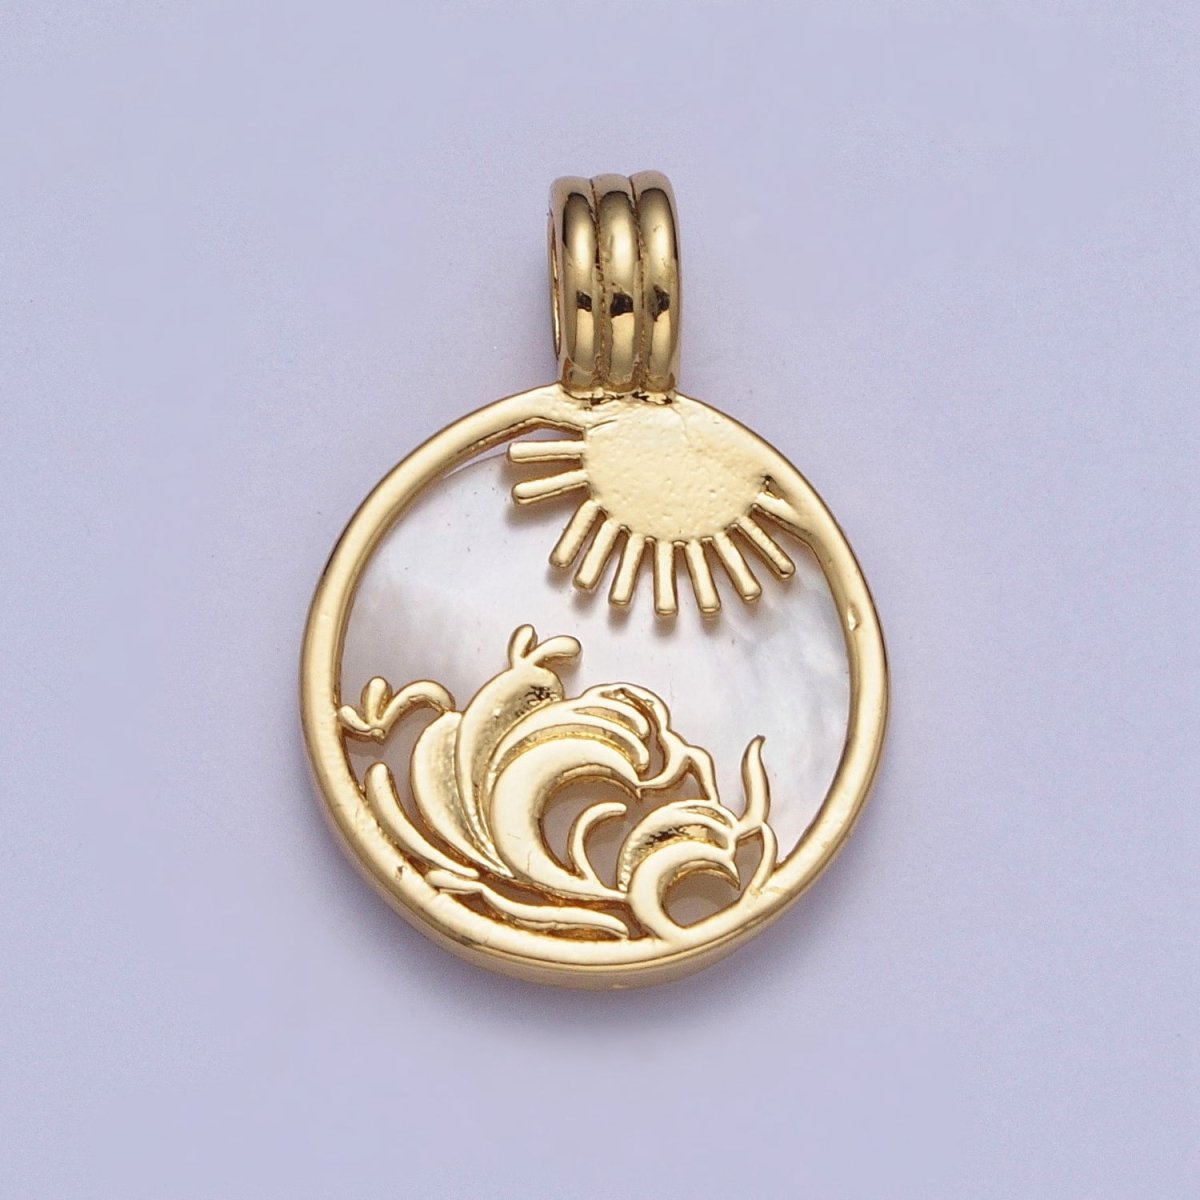 Pearl Collection Gold Element Charm Fire Wind Earth Ocean Wave Charm 24K Gold Filled Medallion for Necklace Bracelet Supply X-402 - X-405 - DLUXCA